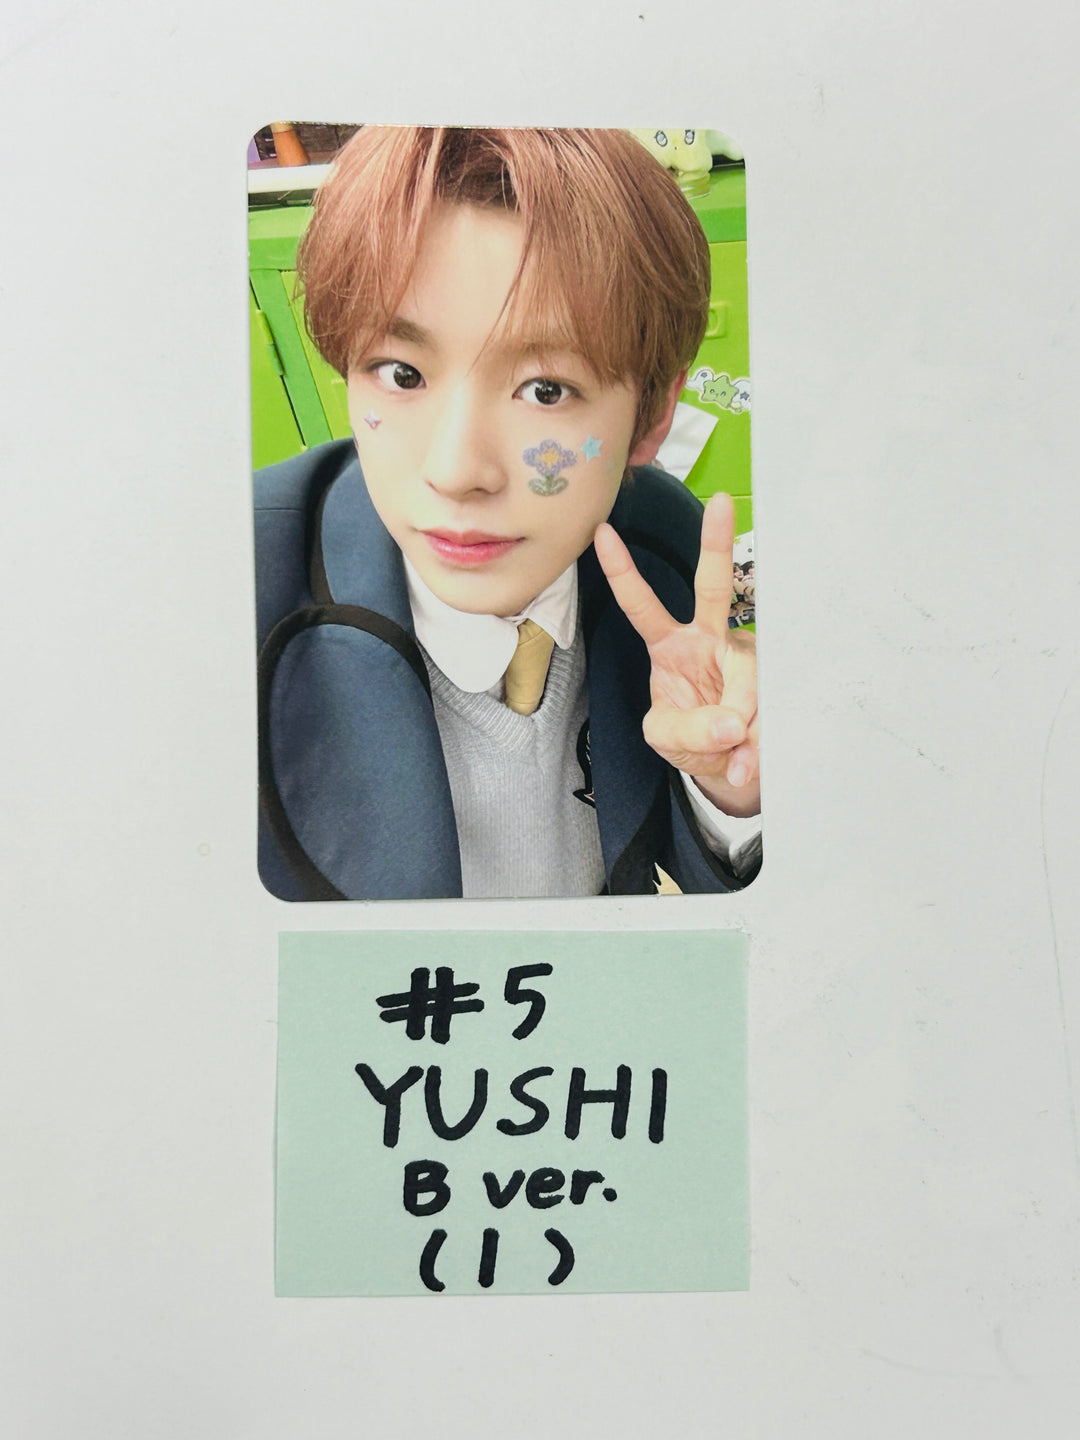 NCT Wish - Official Trading Photocard [B Ver.] [24.4.29]